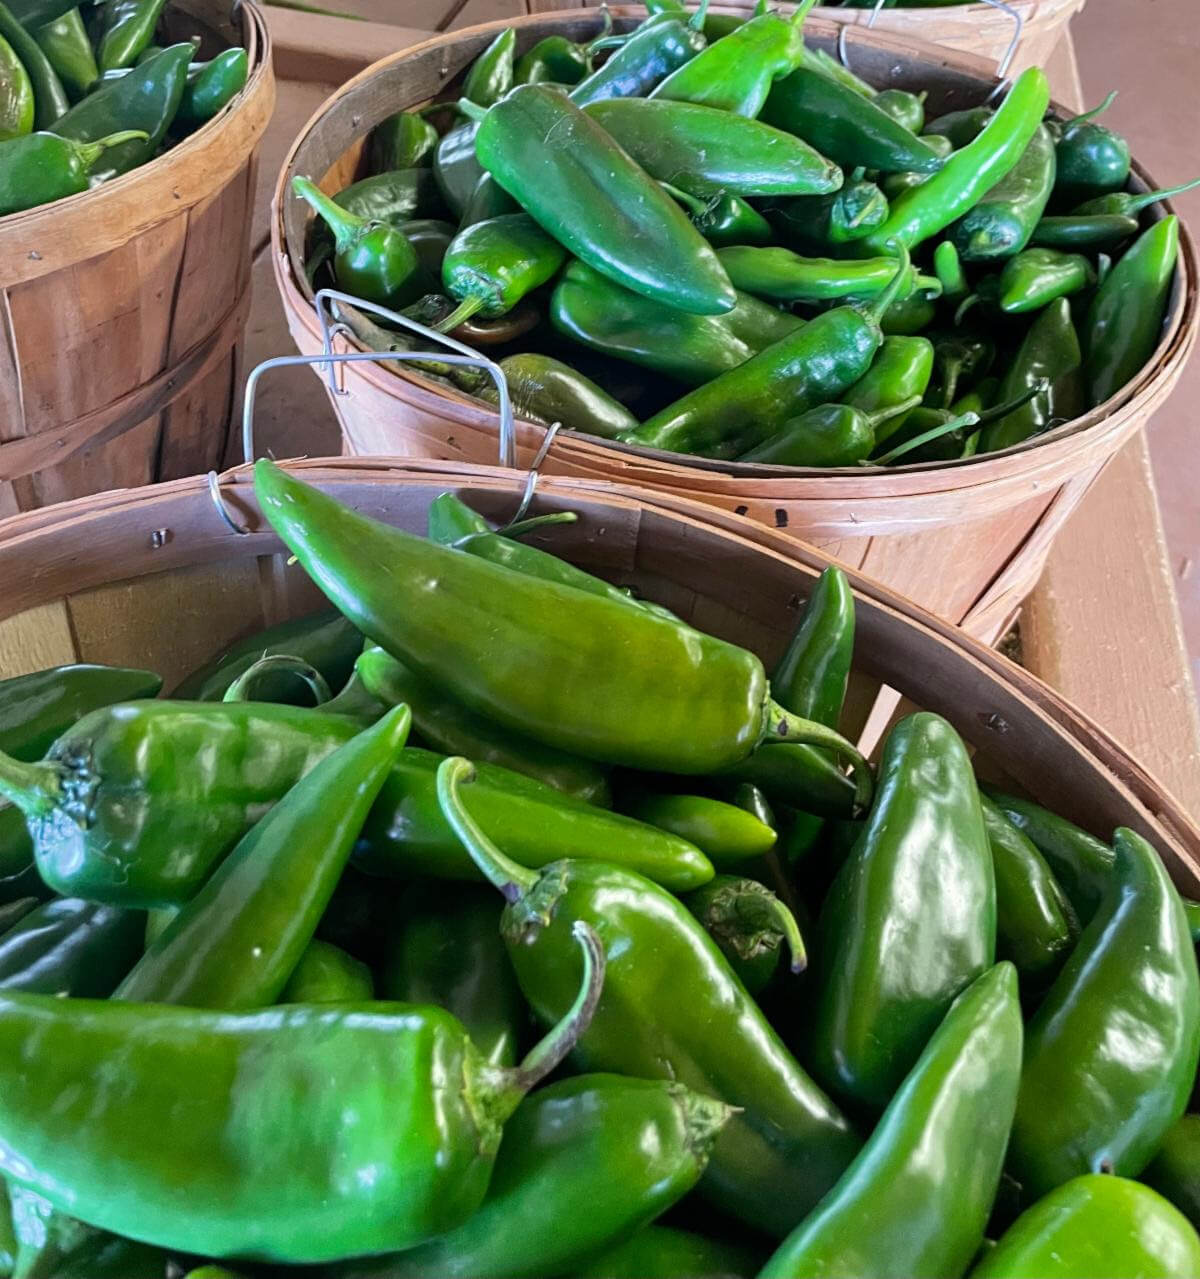 Wooden baskets filled with jalapeno peppers